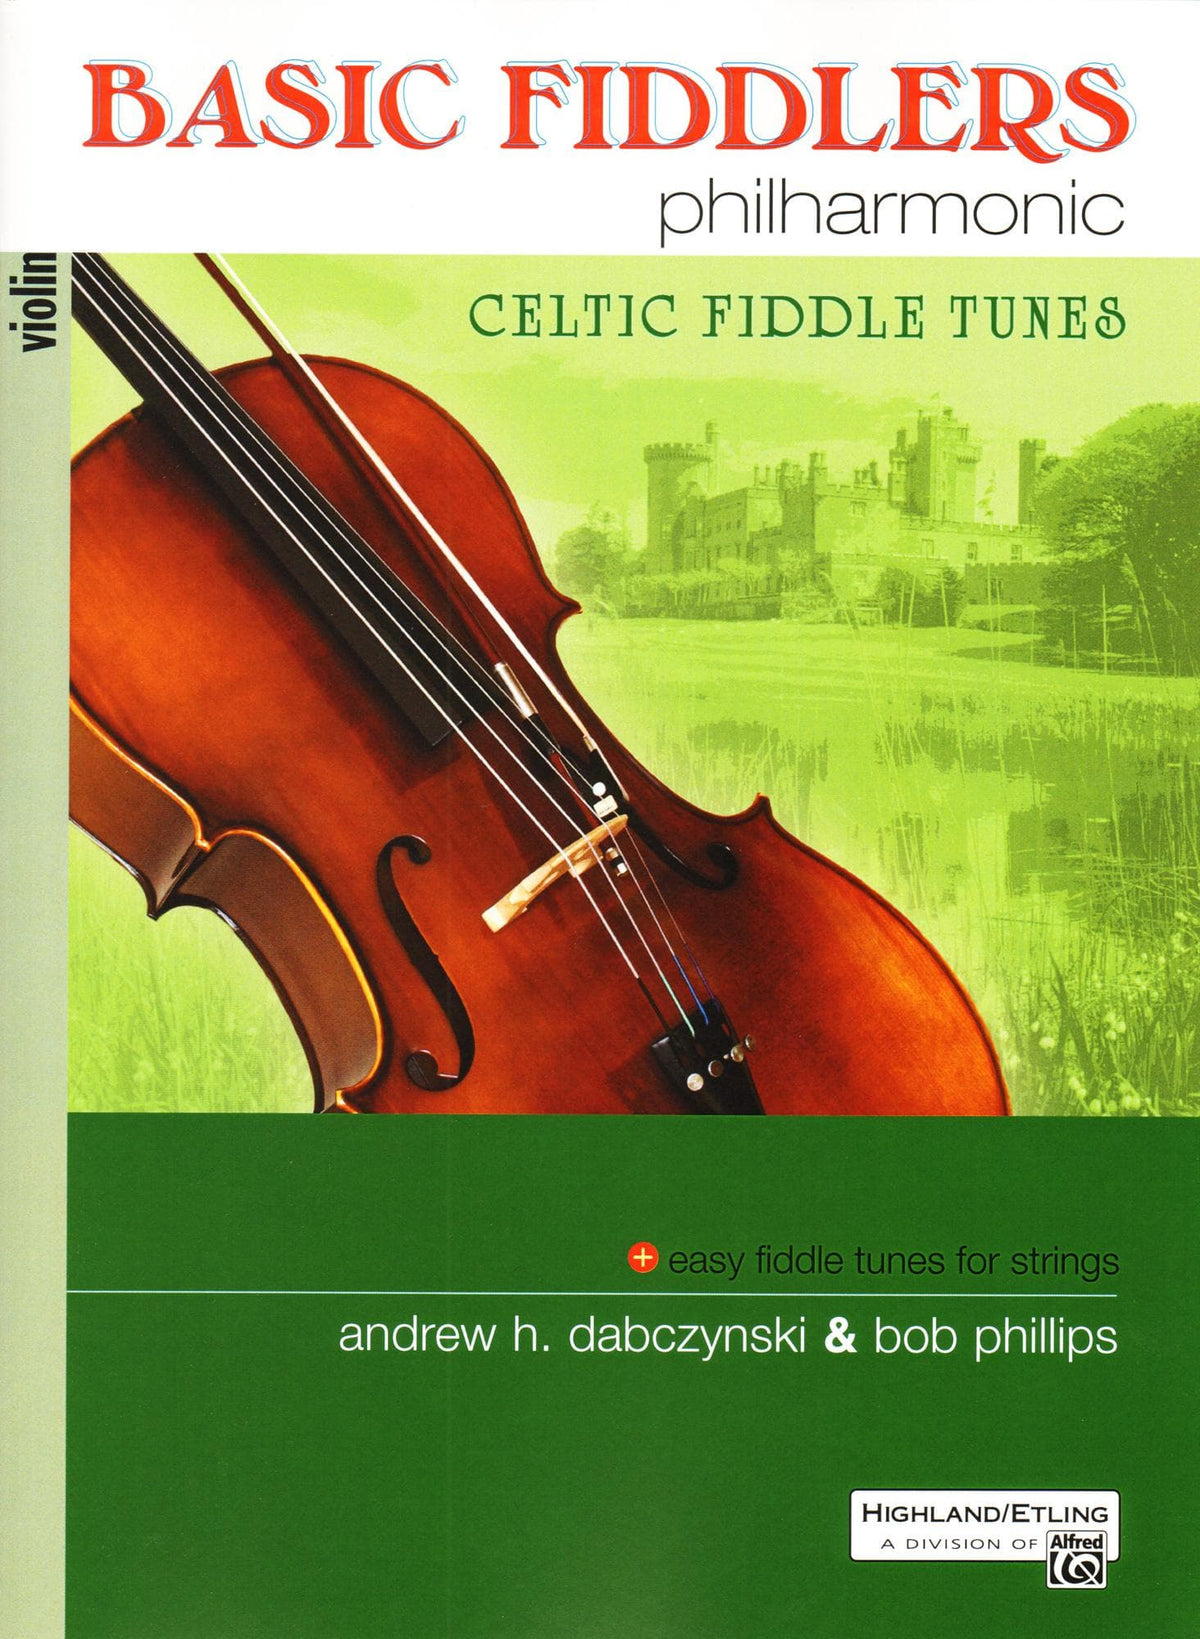 Basic Fiddlers Philharmonic - Celtic Fiddle Tunes - Violin Book - by Dabczynski & Phillips - Alfred Publishing